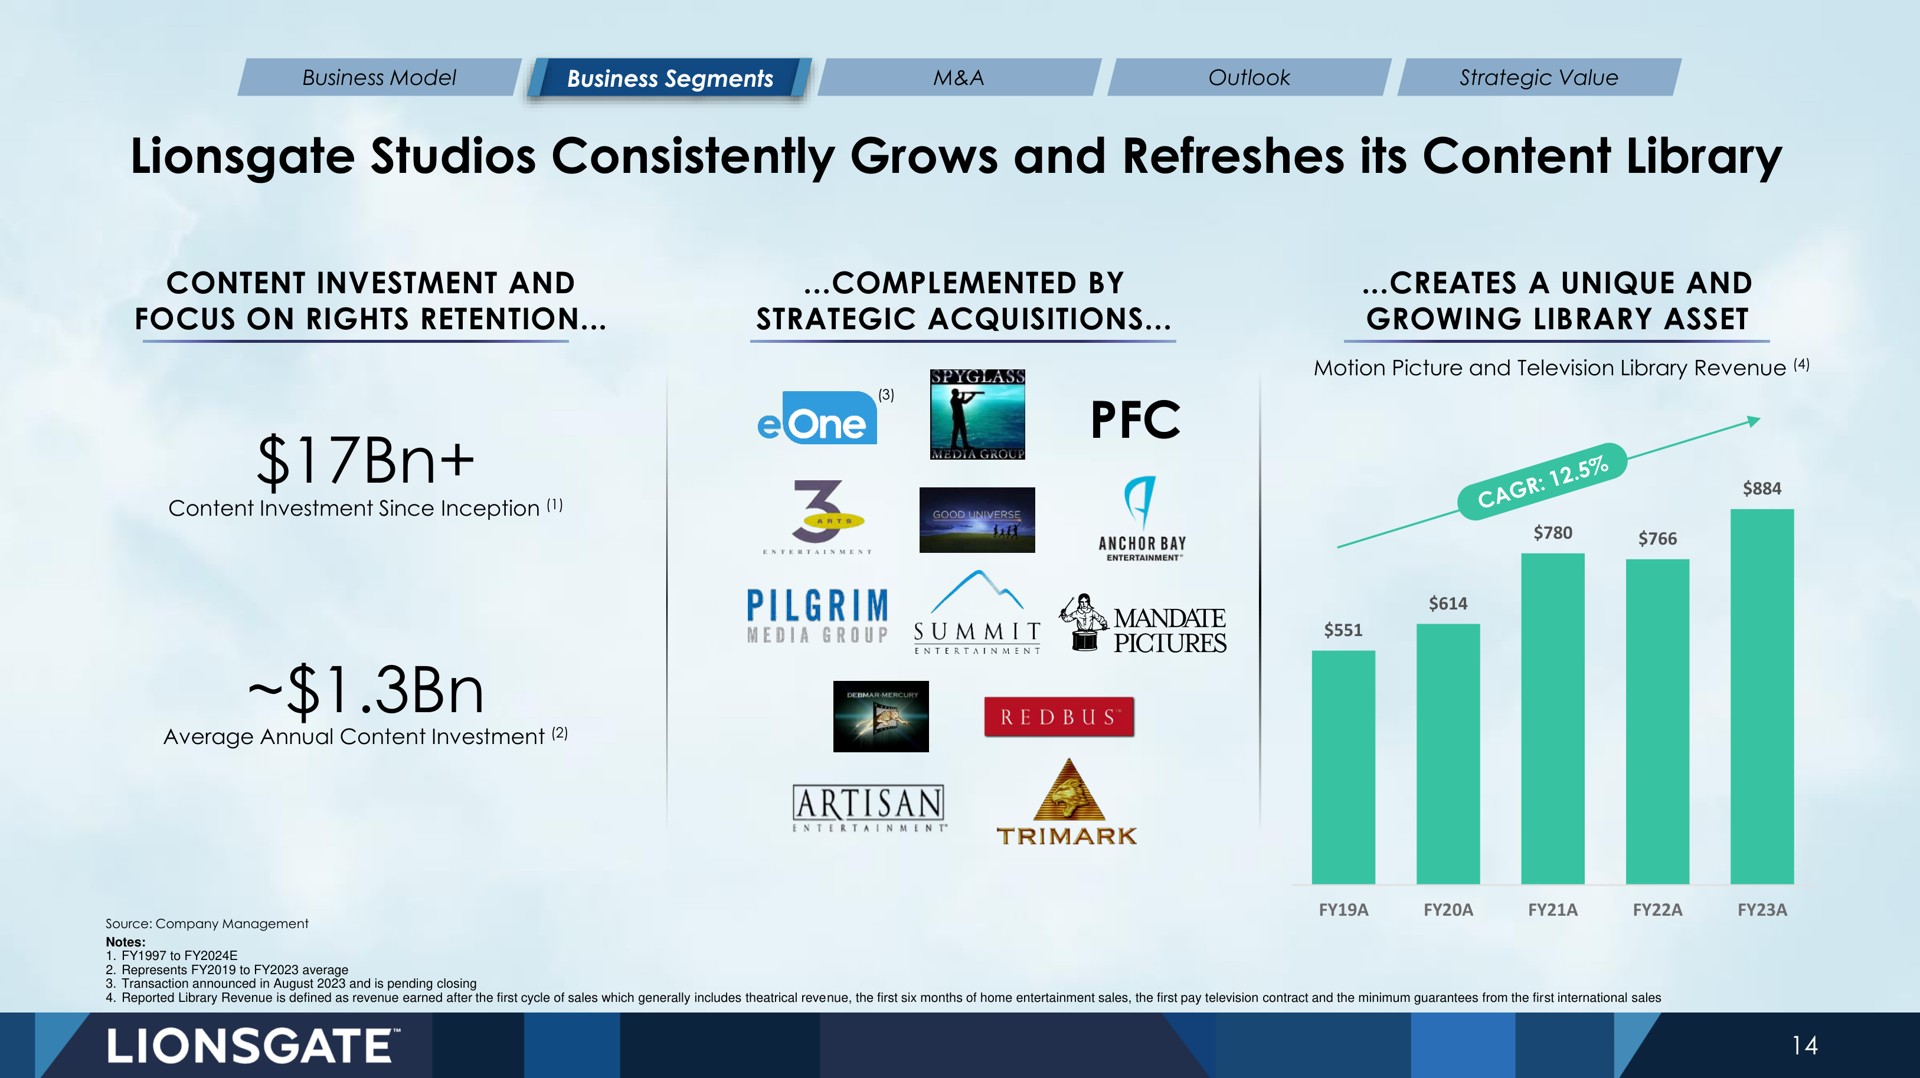 studios consistently grows and refreshes its content library | Lionsgate